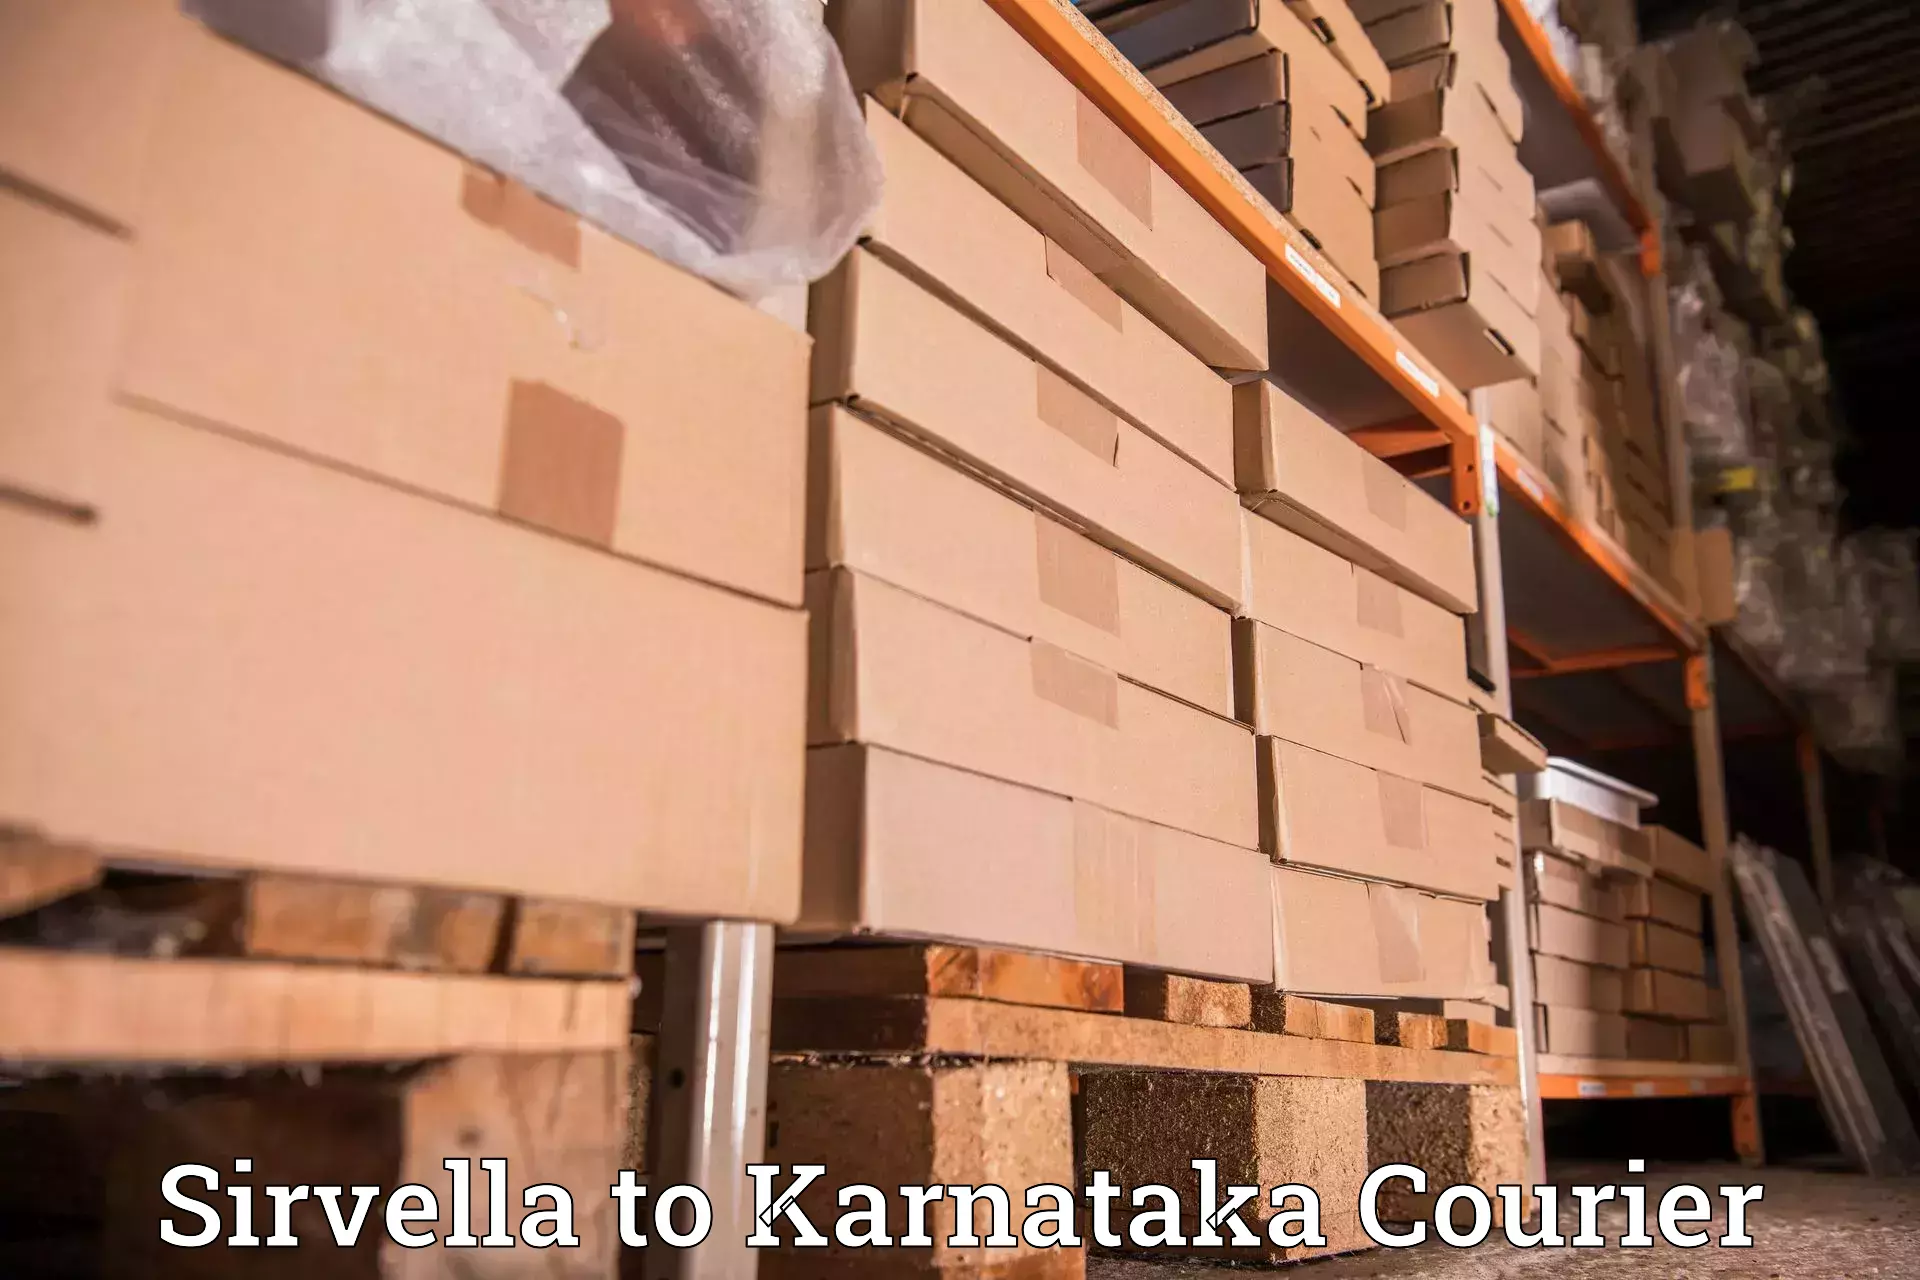 Multi-national courier services Sirvella to Hoovina Hadagali